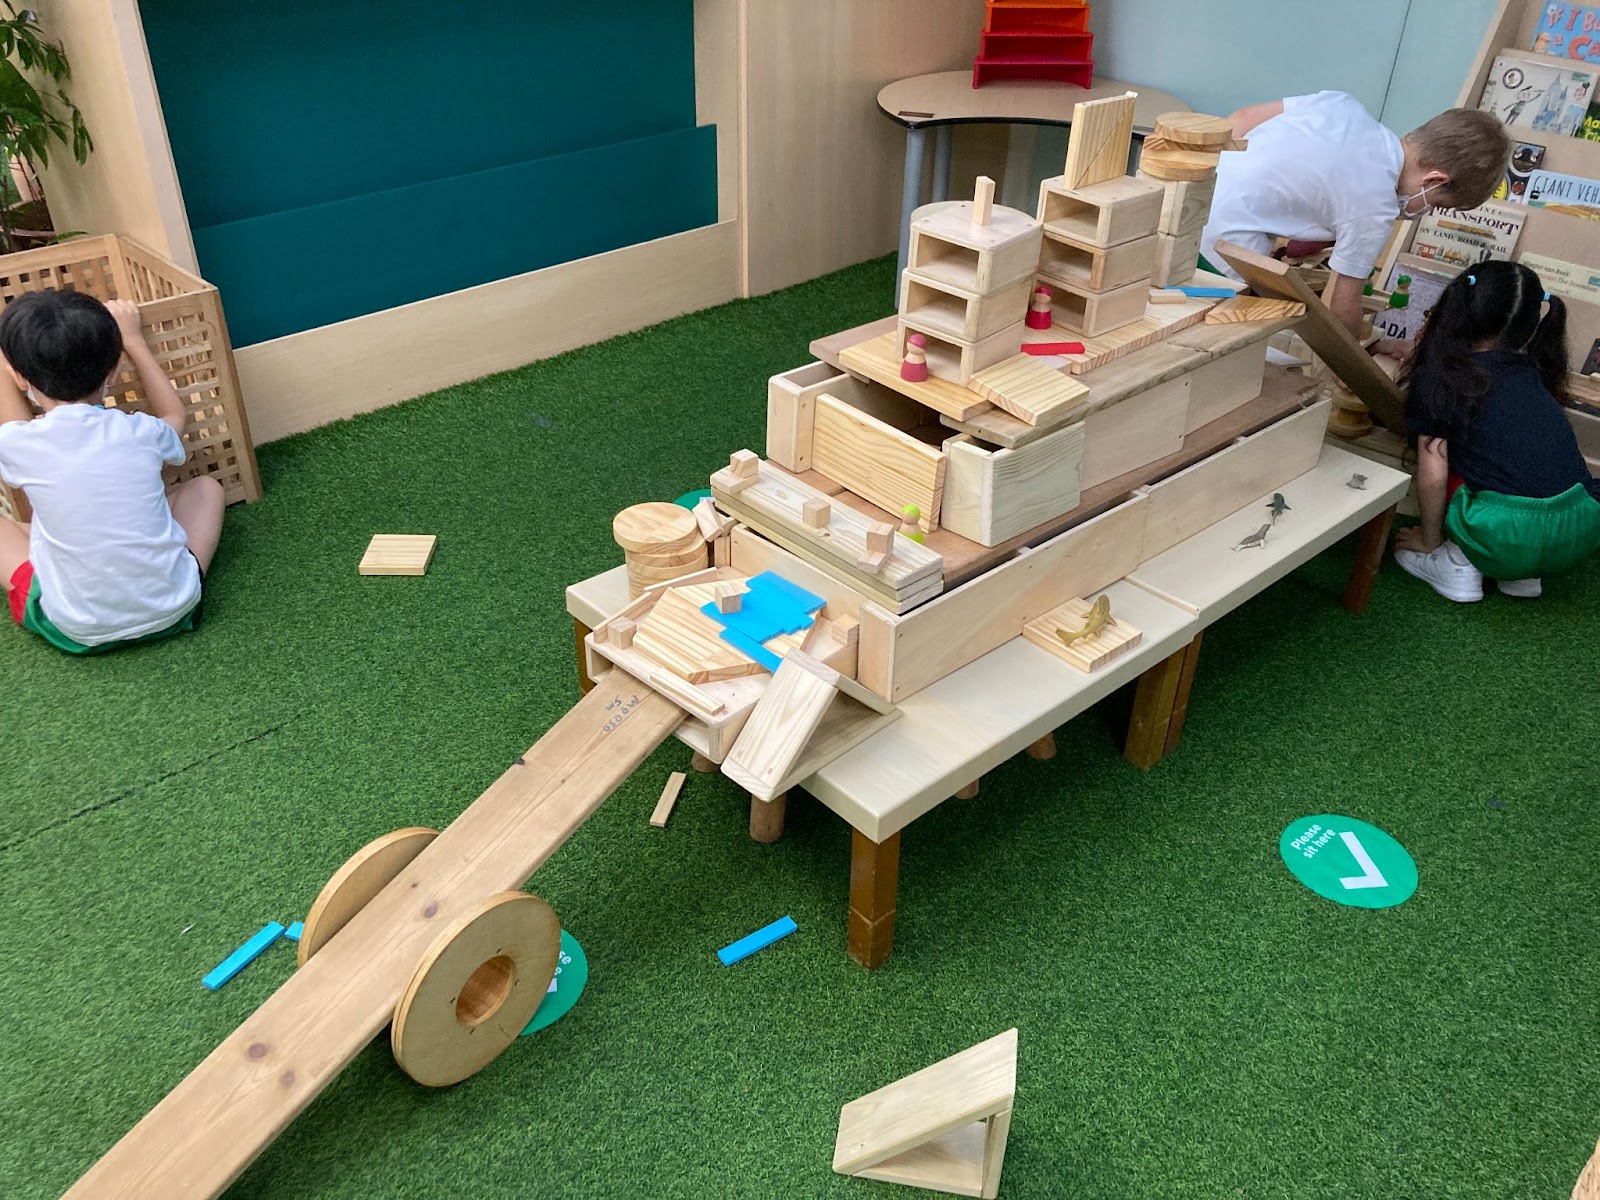 Primary Weekly Highlights: Learning through Block Play